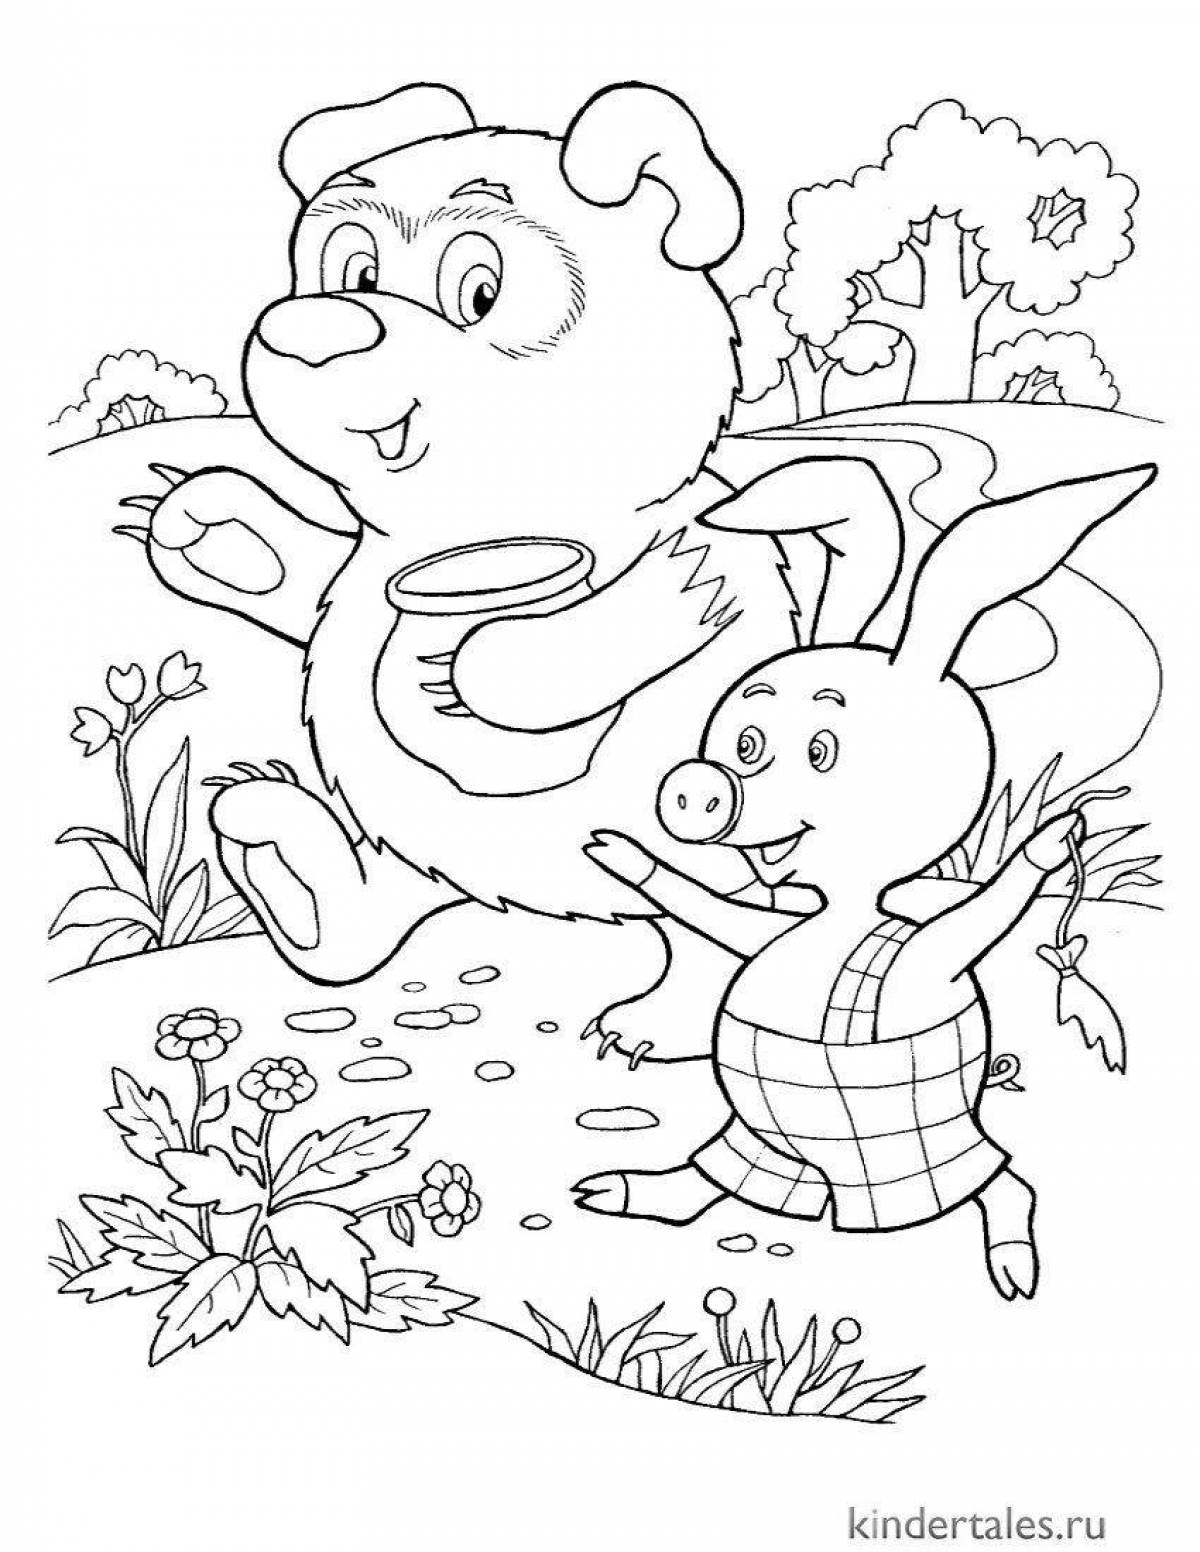 Cute Soviet coloring book for kids